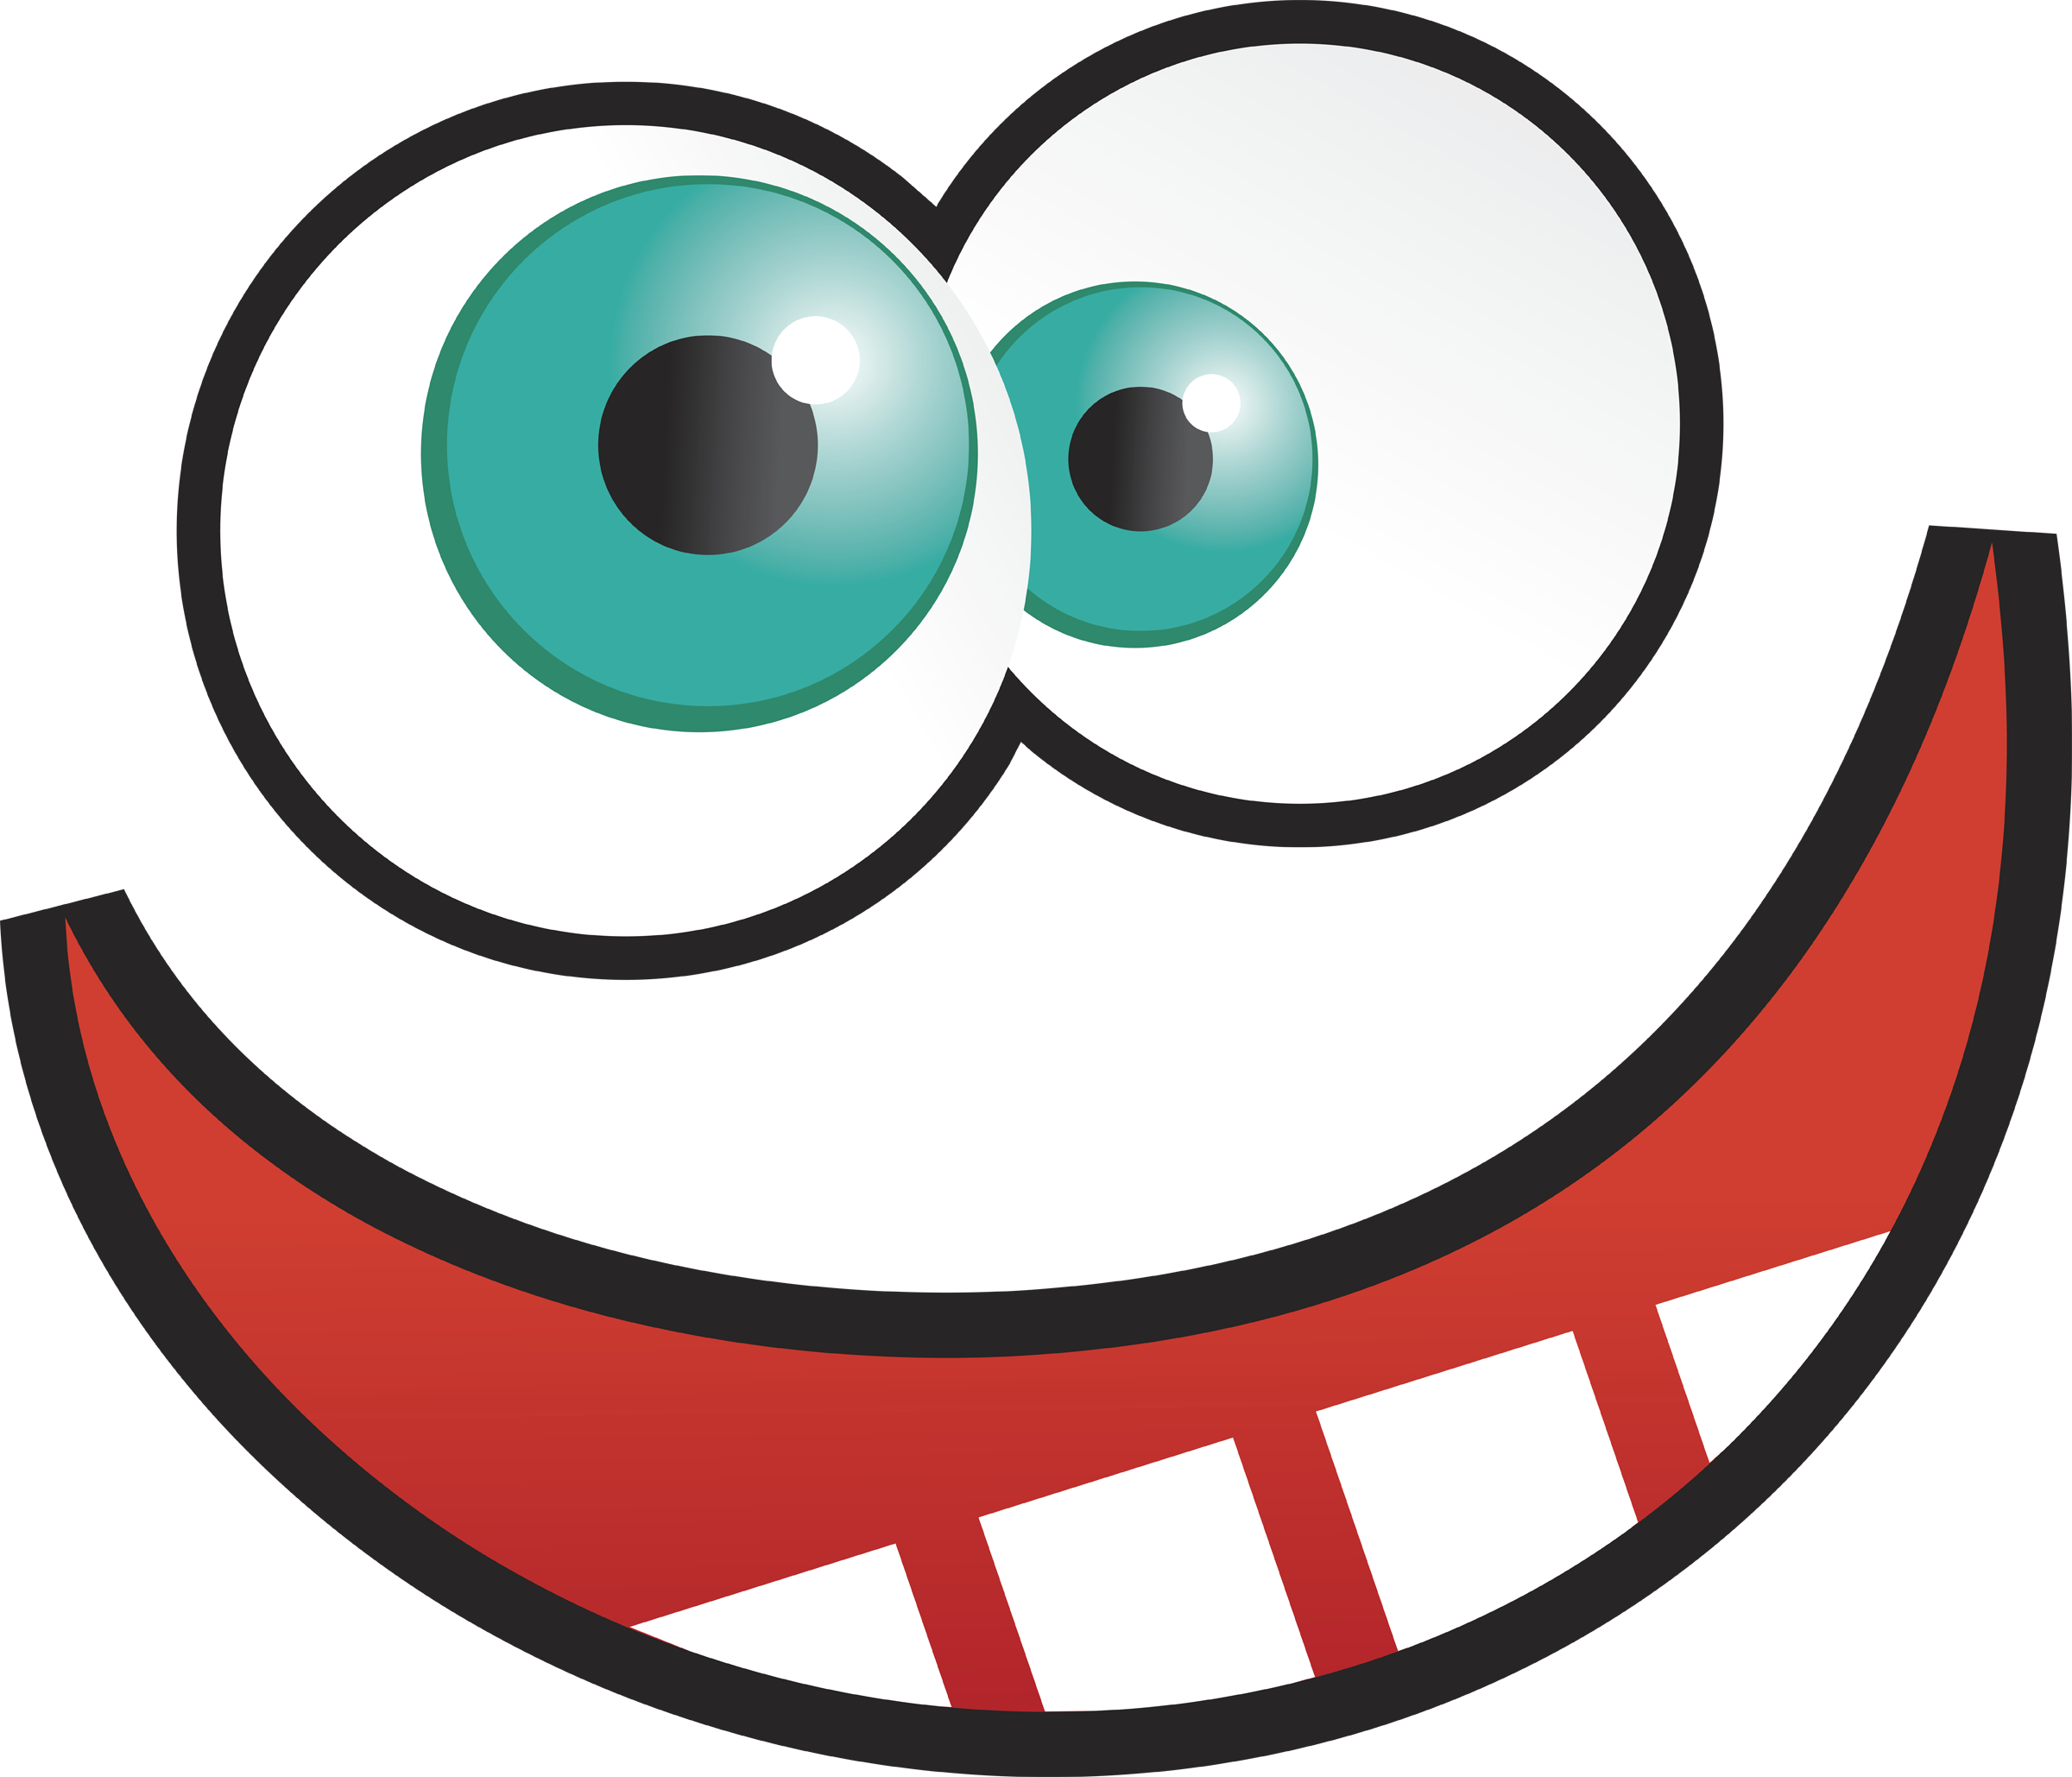 Silly Eyes Clipart